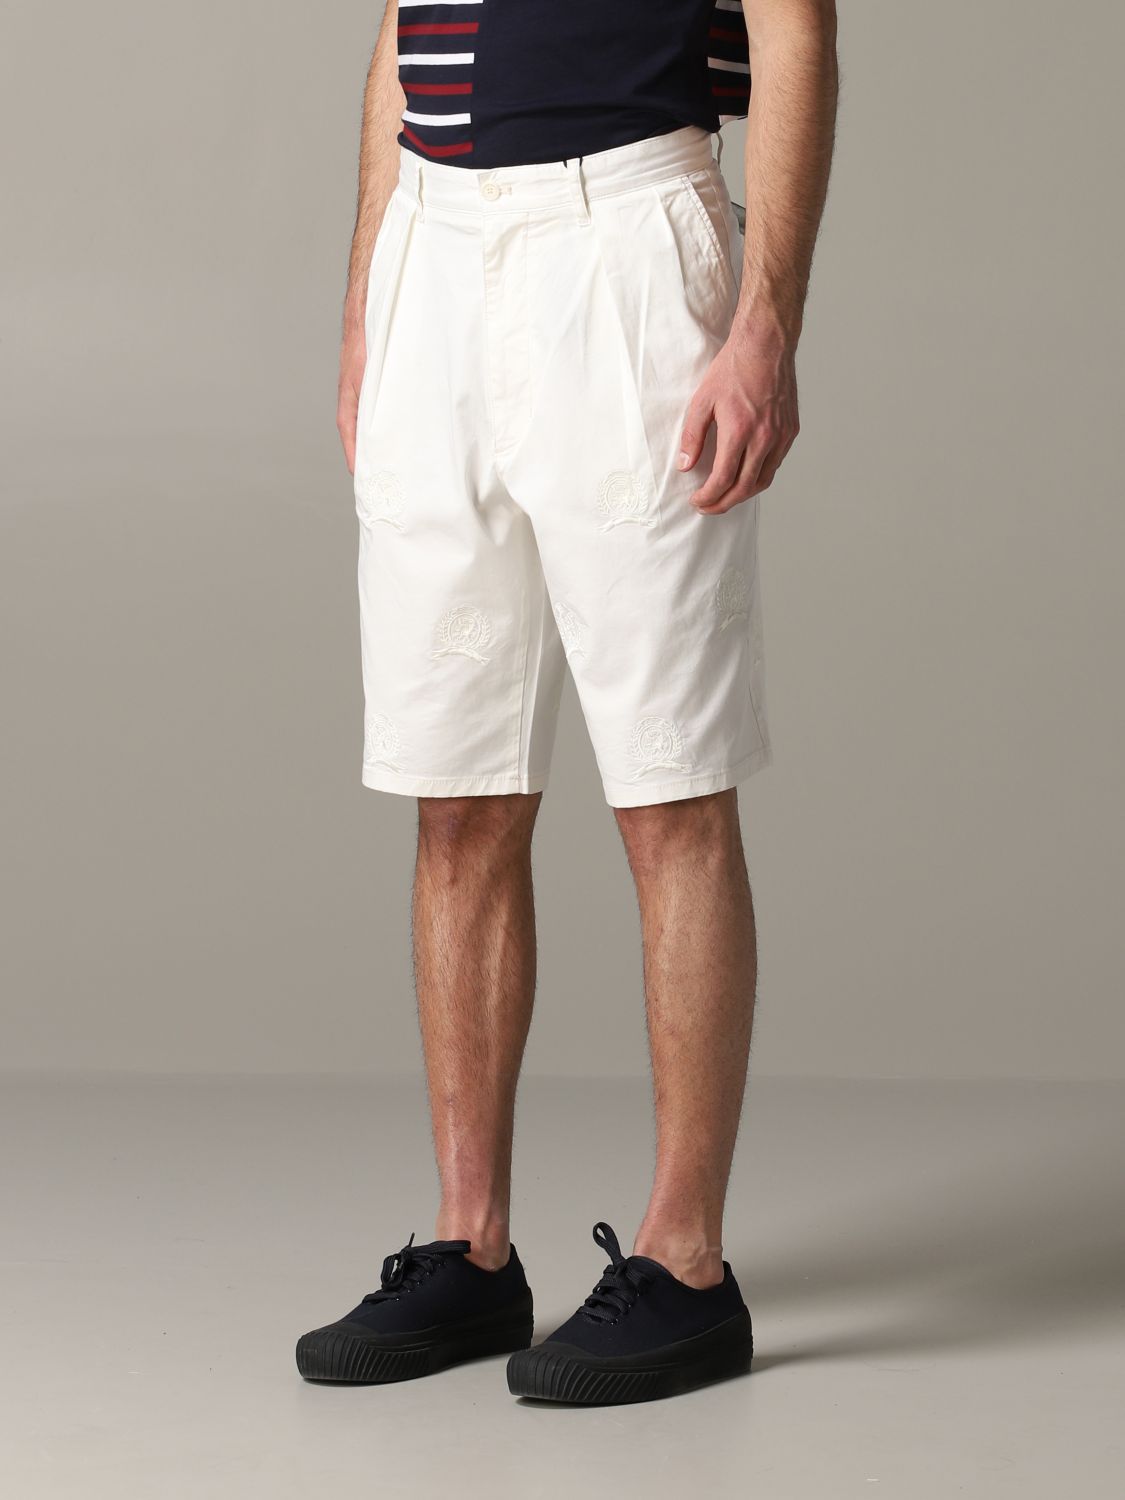 Hilfiger Collection Outlet: Bermuda shorts men Hilfiger Short Hilfiger Collection Men White Hilfiger Collection RE0RE00518 GIGLIO.COM